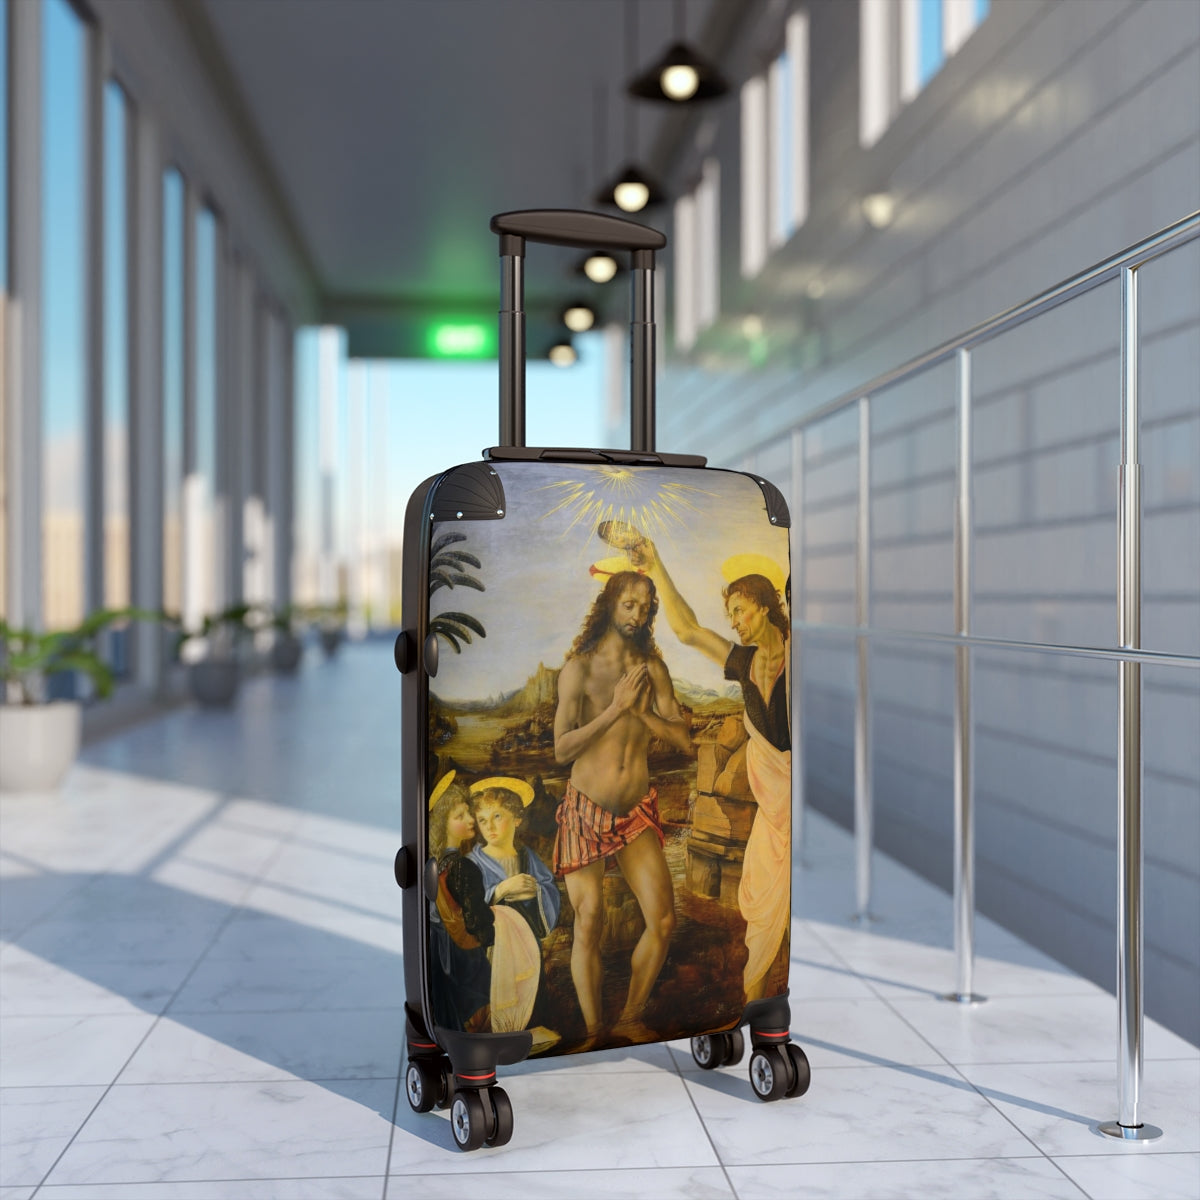 Getrott The Baptism of Christ (Verrocchio and Leonardo) Black Cabin Suitcase Extended Storage Adjustable Telescopic Handle Double wheeled Polycarbonate Hard-shell Built-in Lock-Bags-Geotrott